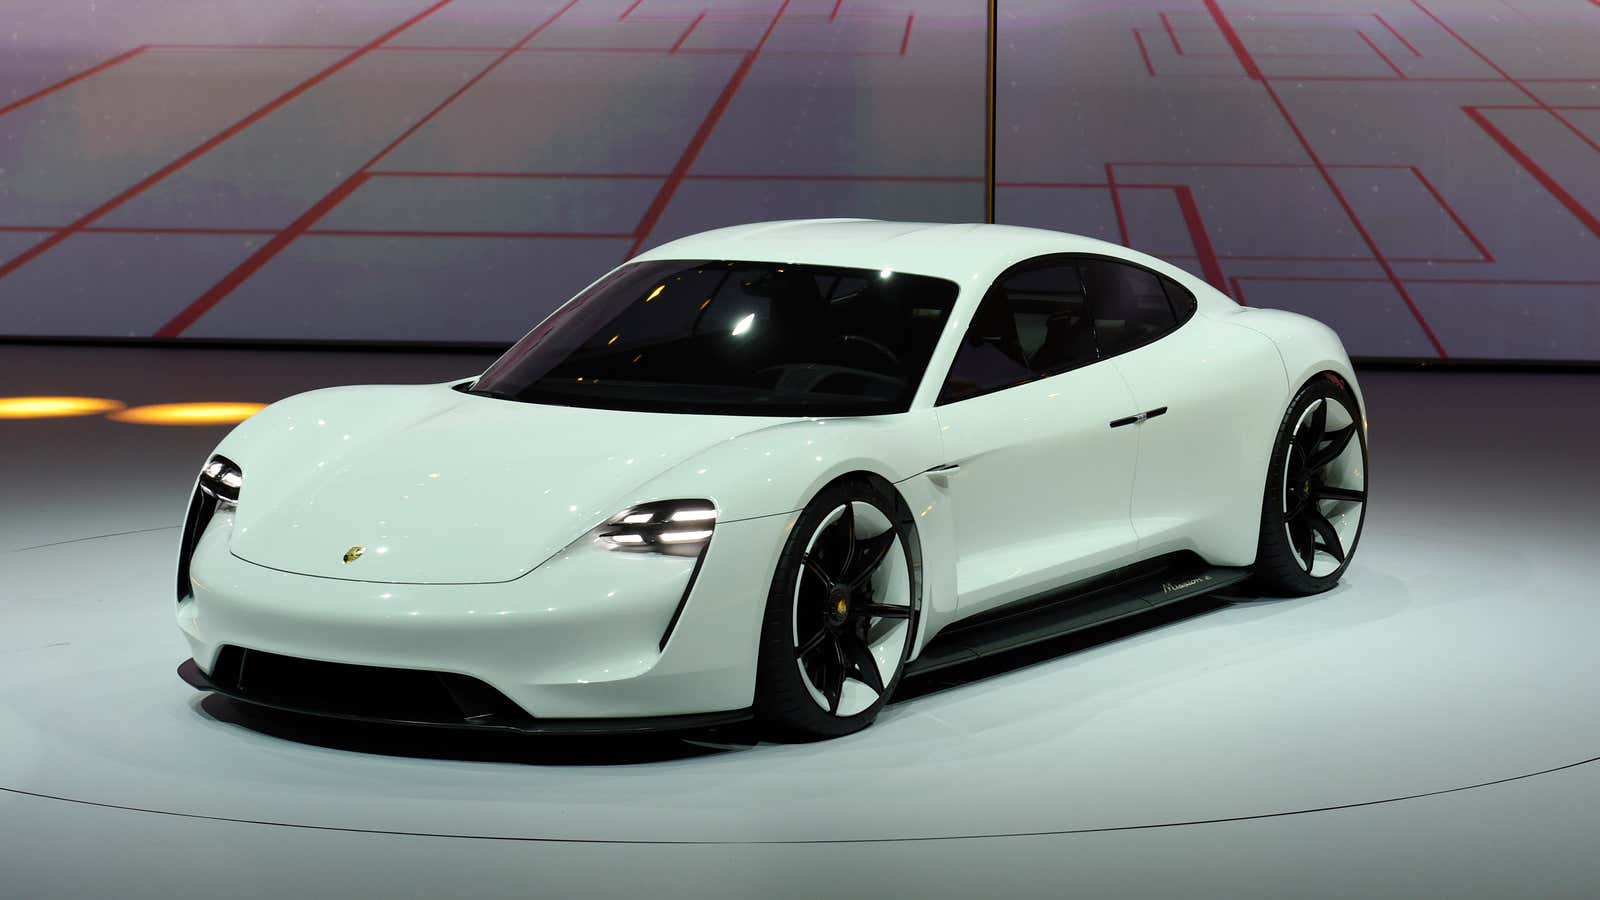 Porsche's Mission E will compete with Tesla, with a 2019 release